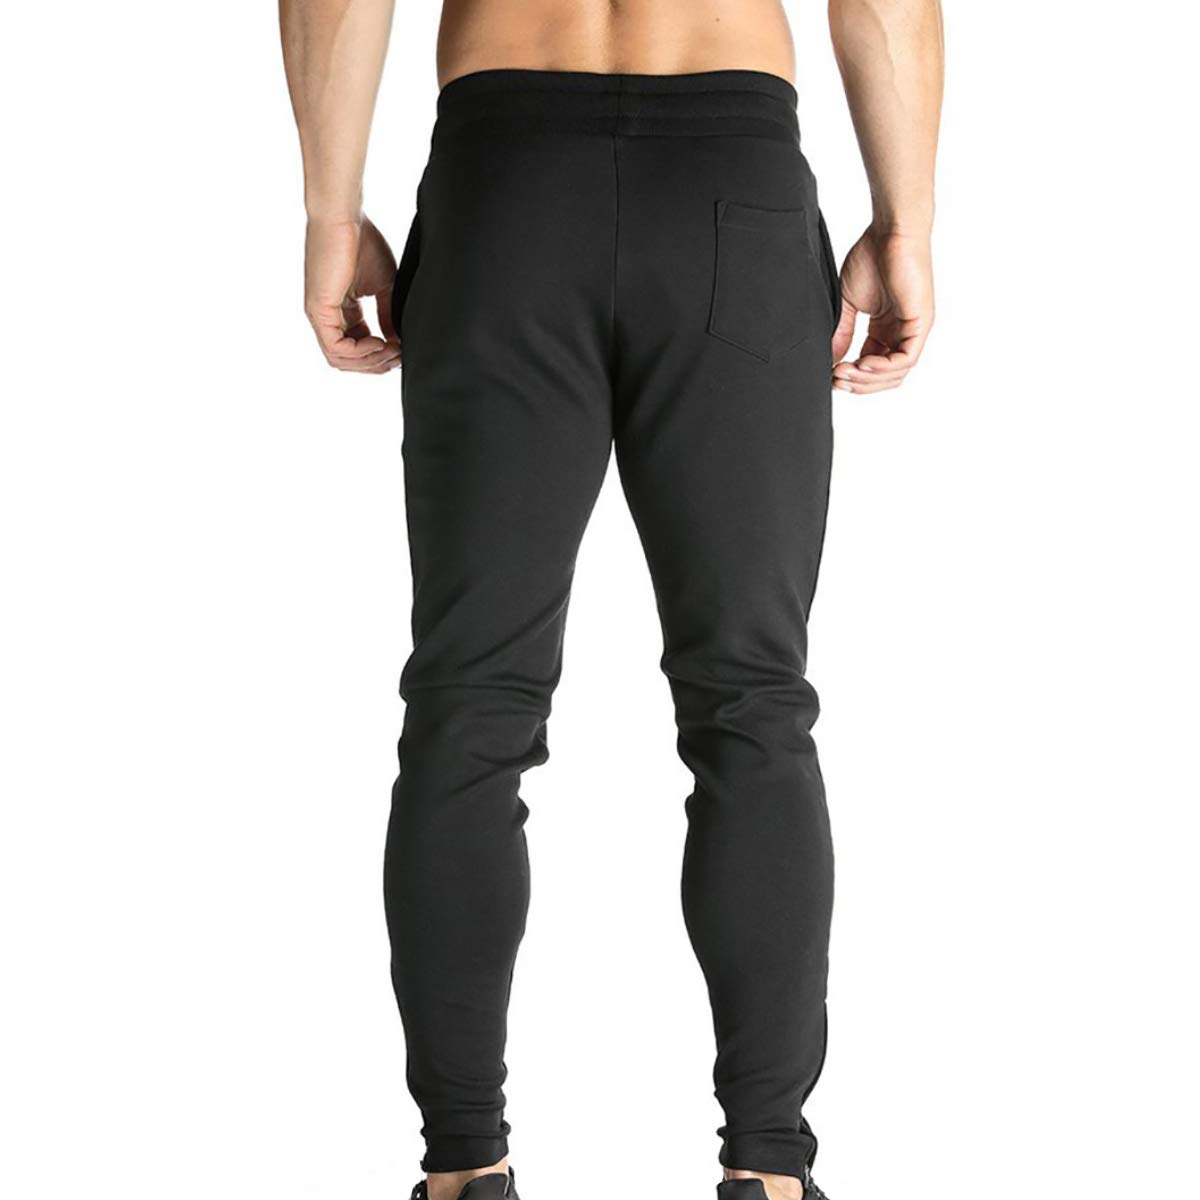 BROKIG Mens Zip Jogger Pants - Casual Gym Fitness Trousers Comfortable Tracksuit Slim Fit Bottoms Sweat Pants with Pockets (X-Large, Black)